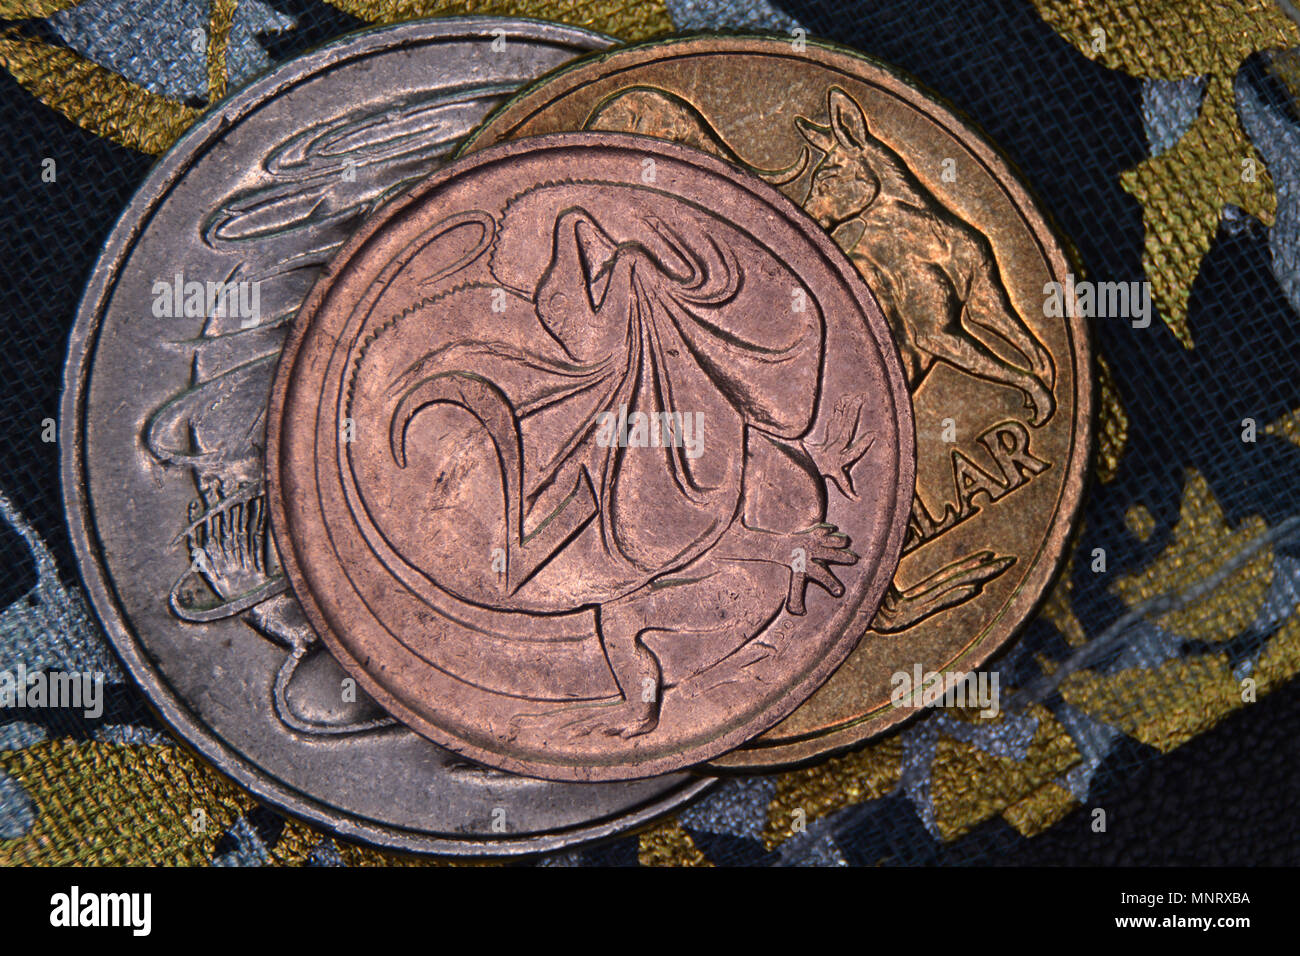 Finance pyramid - Australian coins stacked on each other. Two cent coin, discontinued in 1991 and withdrawn from circulation, on top. Stock Photo